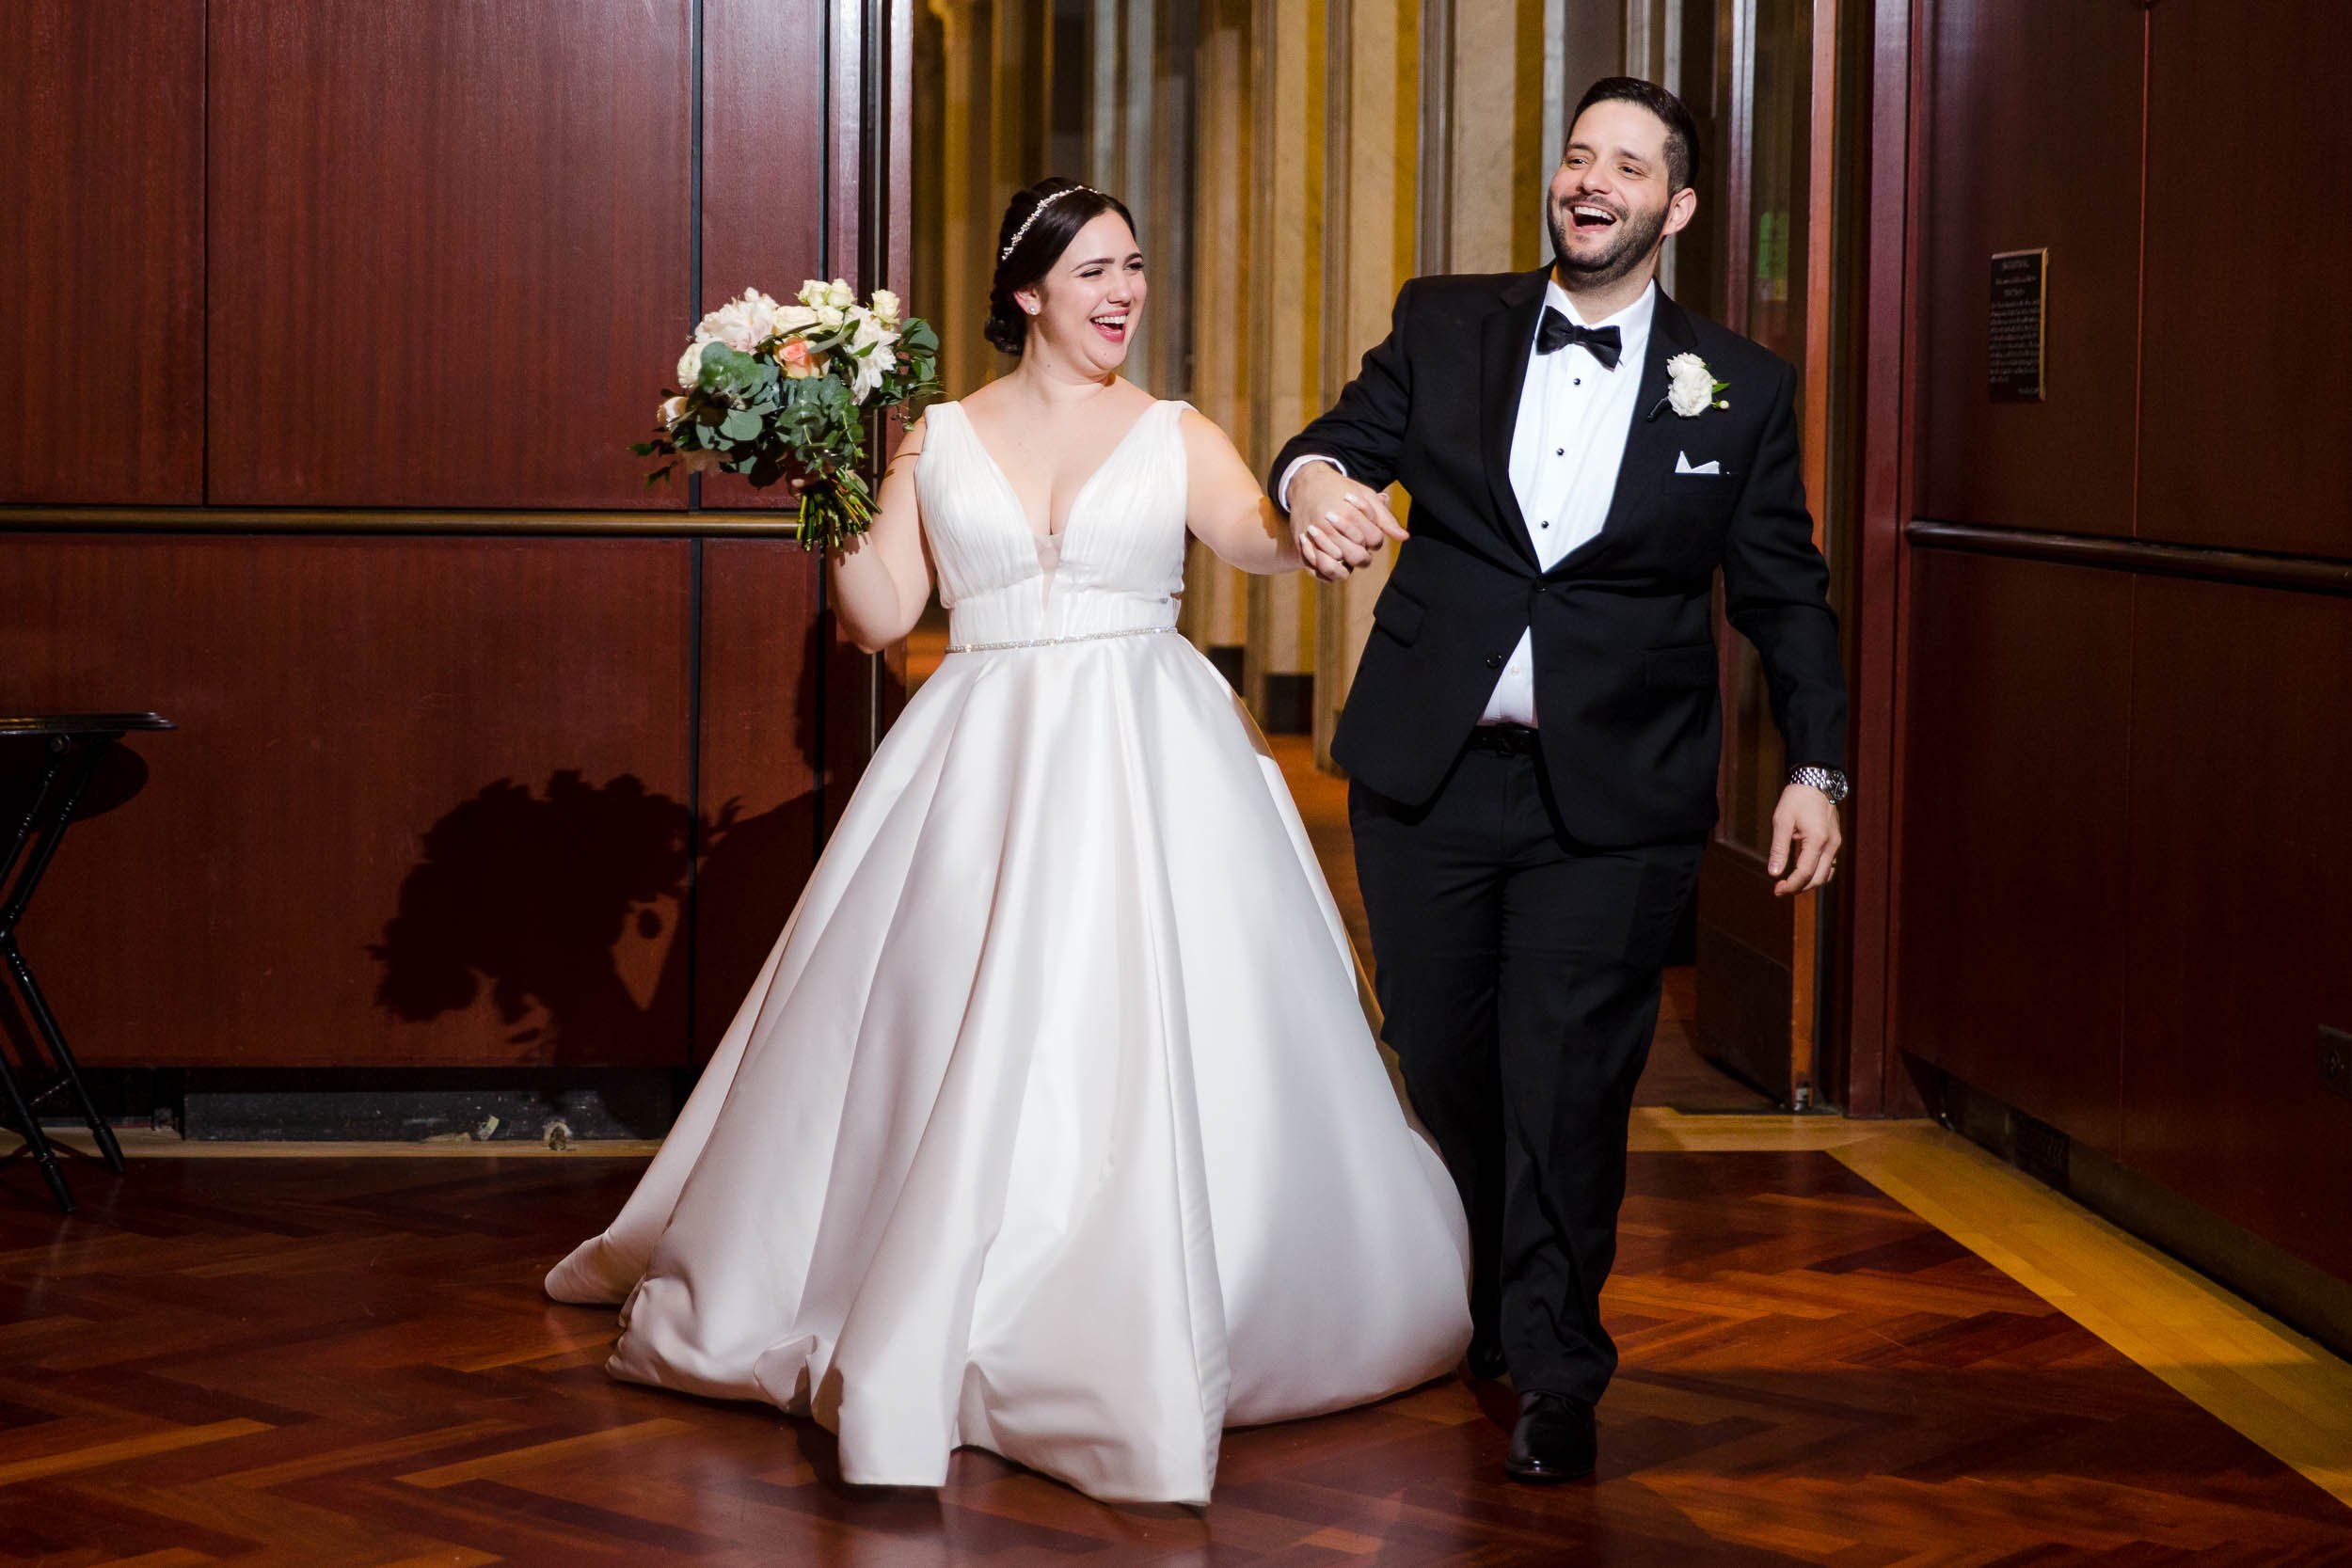 Wedding Day Photos | Newberry Library | J. Brown Photography | bride and groom introduction to reception.